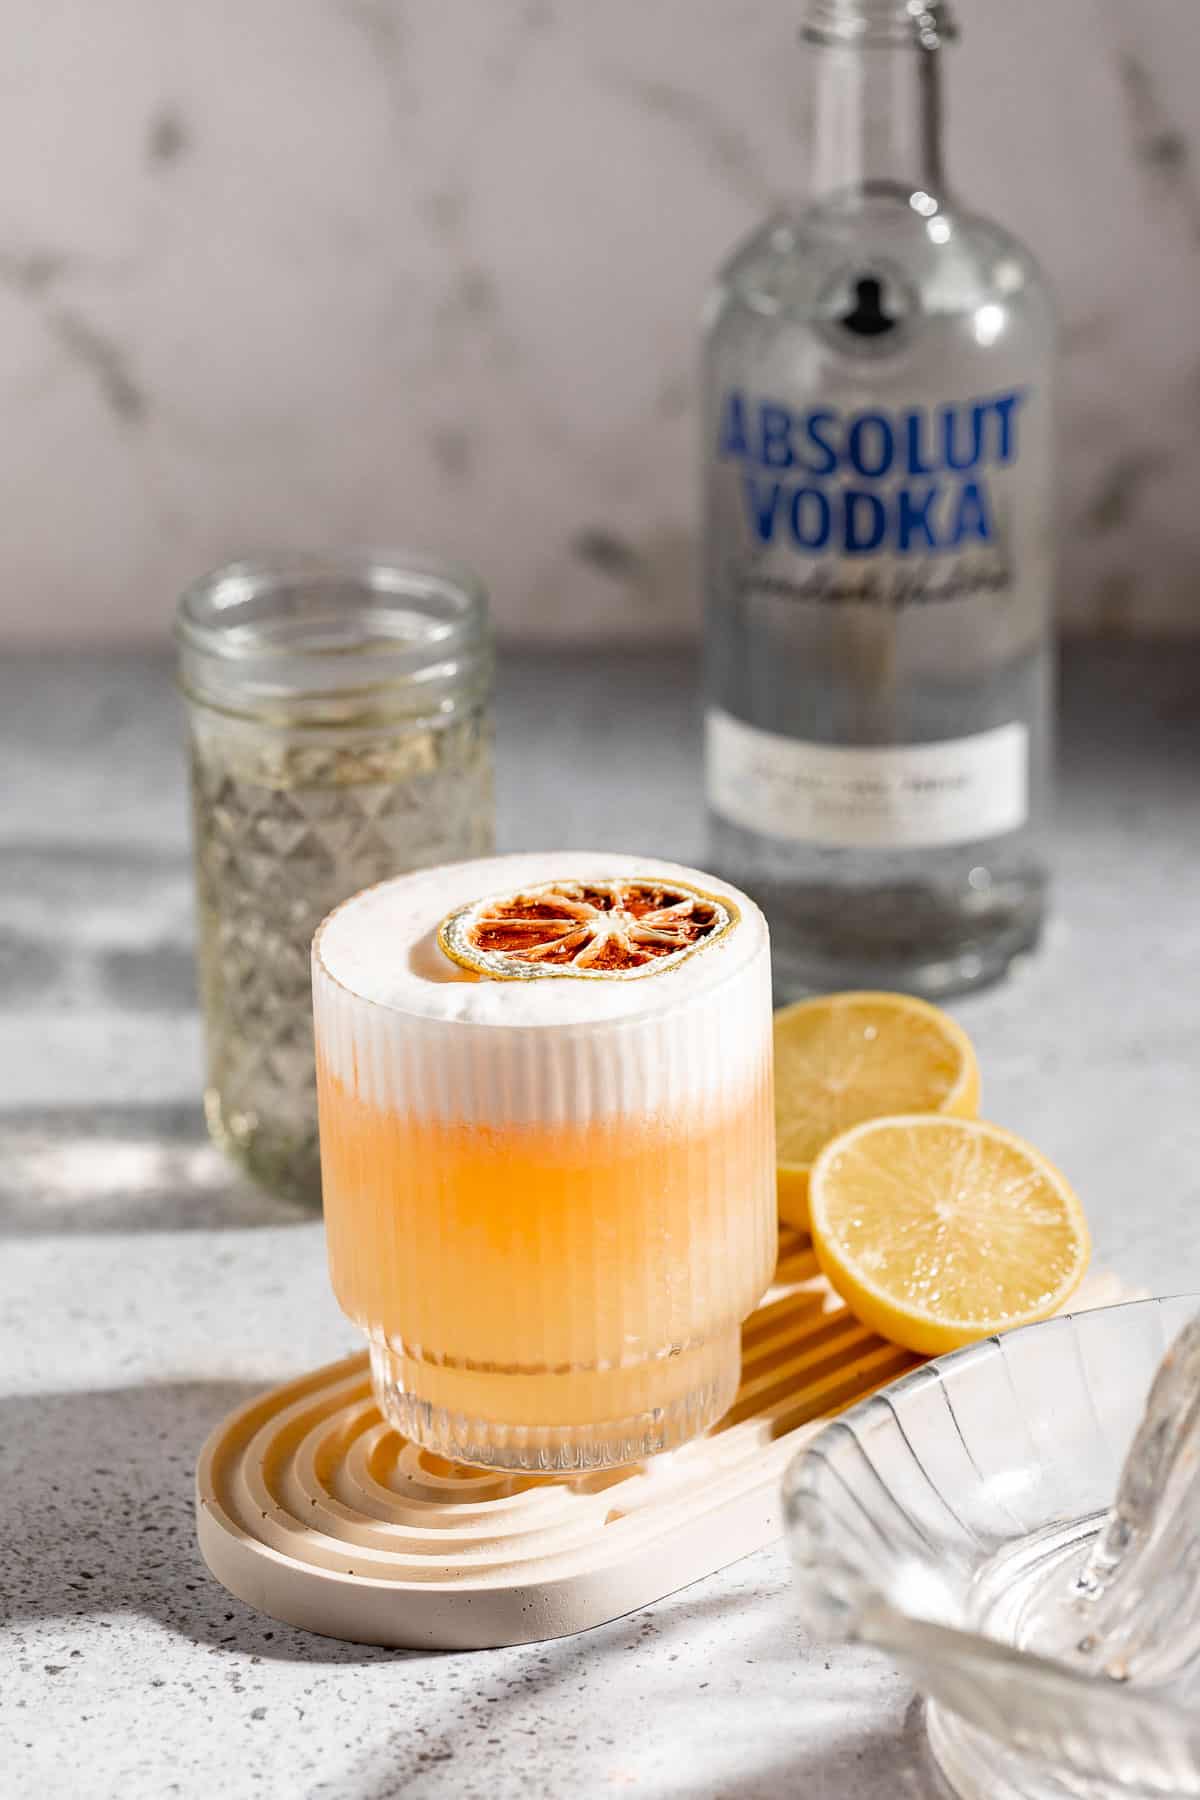 vodka sour on grey background with bottle of absolut vodka and simple syrup in jar